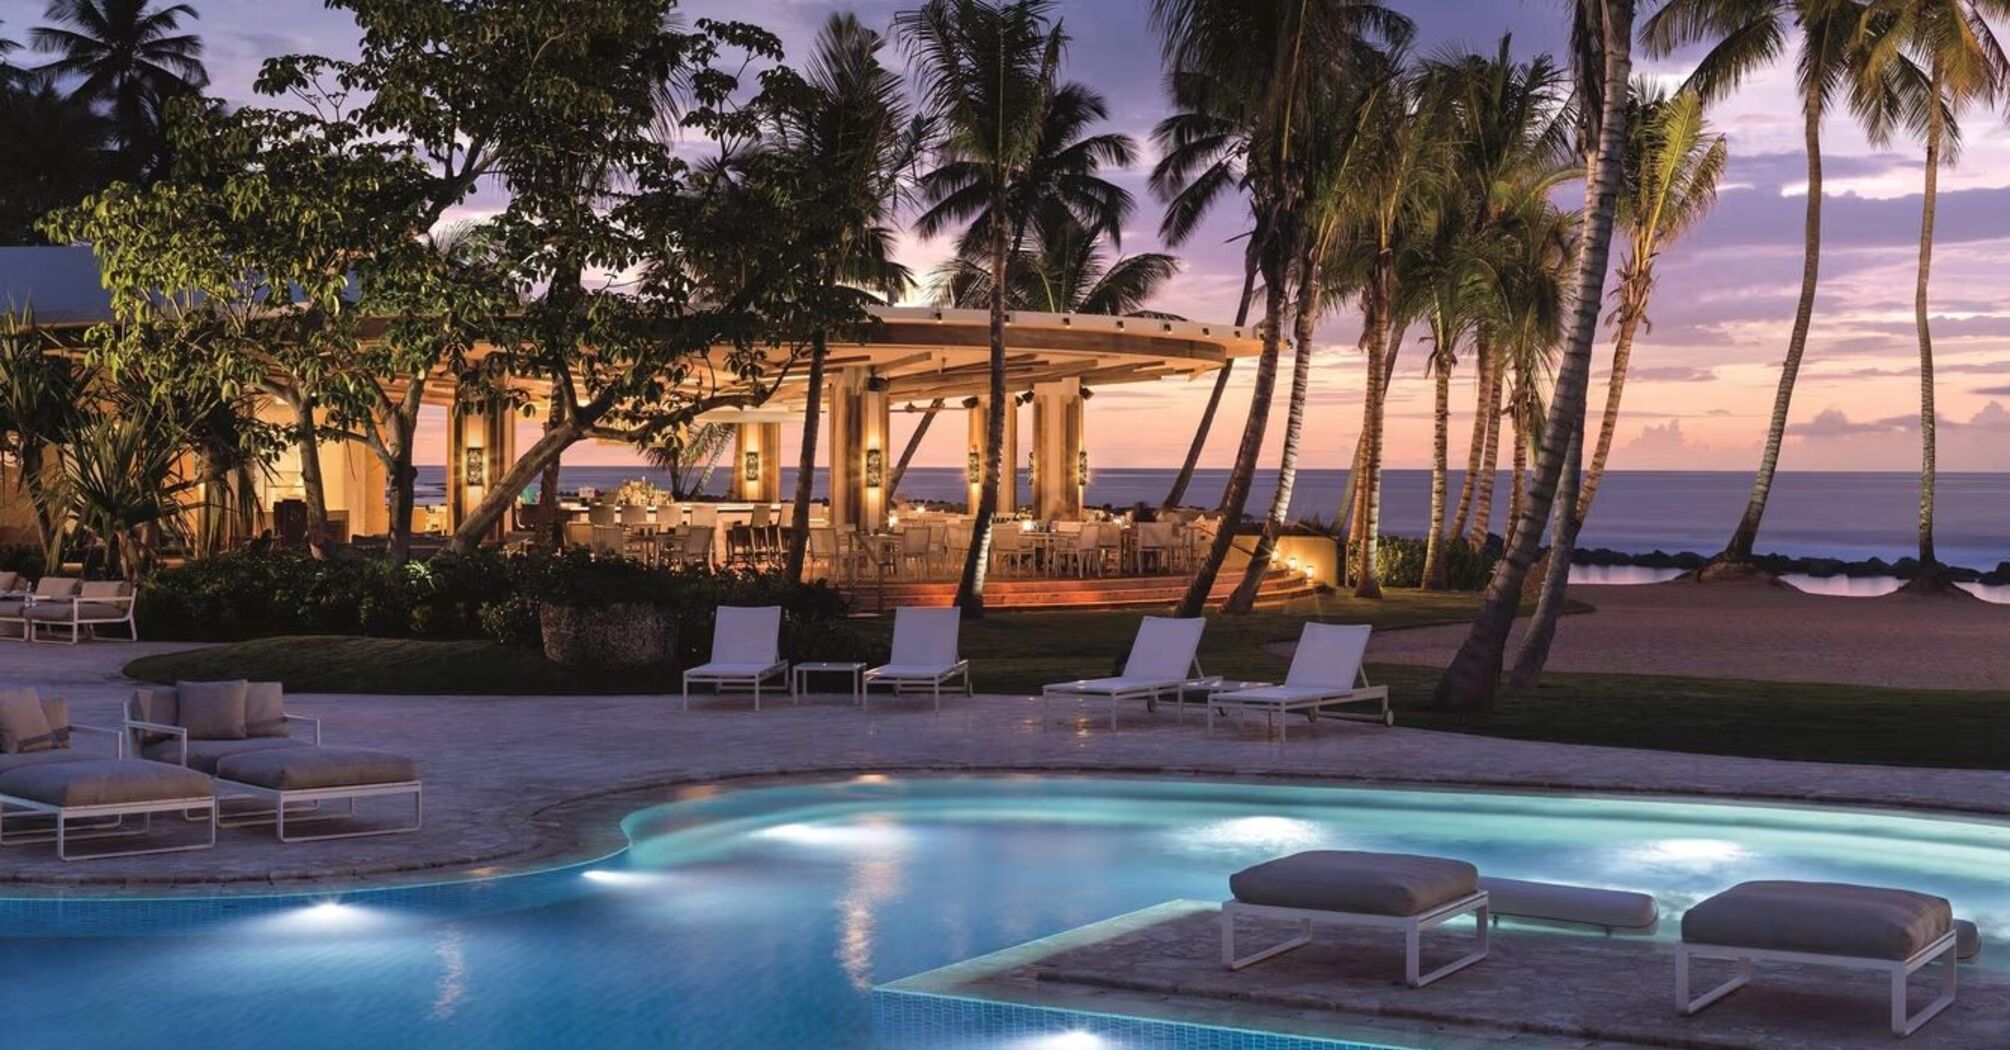 Top 5 resorts in Puerto Rico where travelers recommend staying: with exclusive spas, fine dining, a coastal water park and breathtaking ocean views